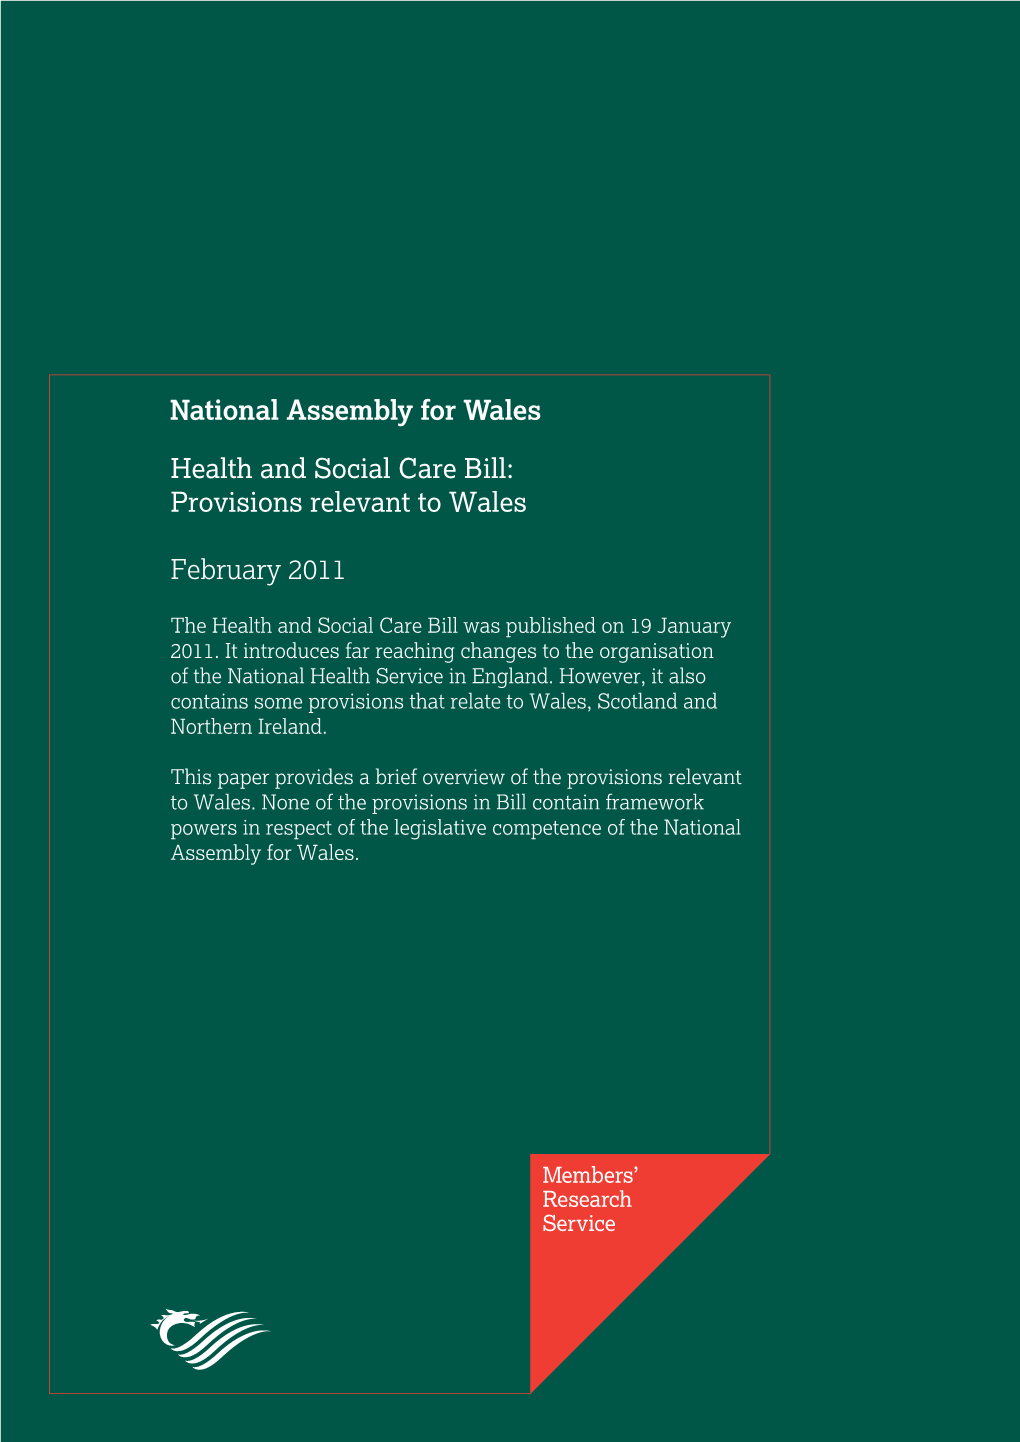 Health and Social Care Bill: Provisions Relevant to Wales